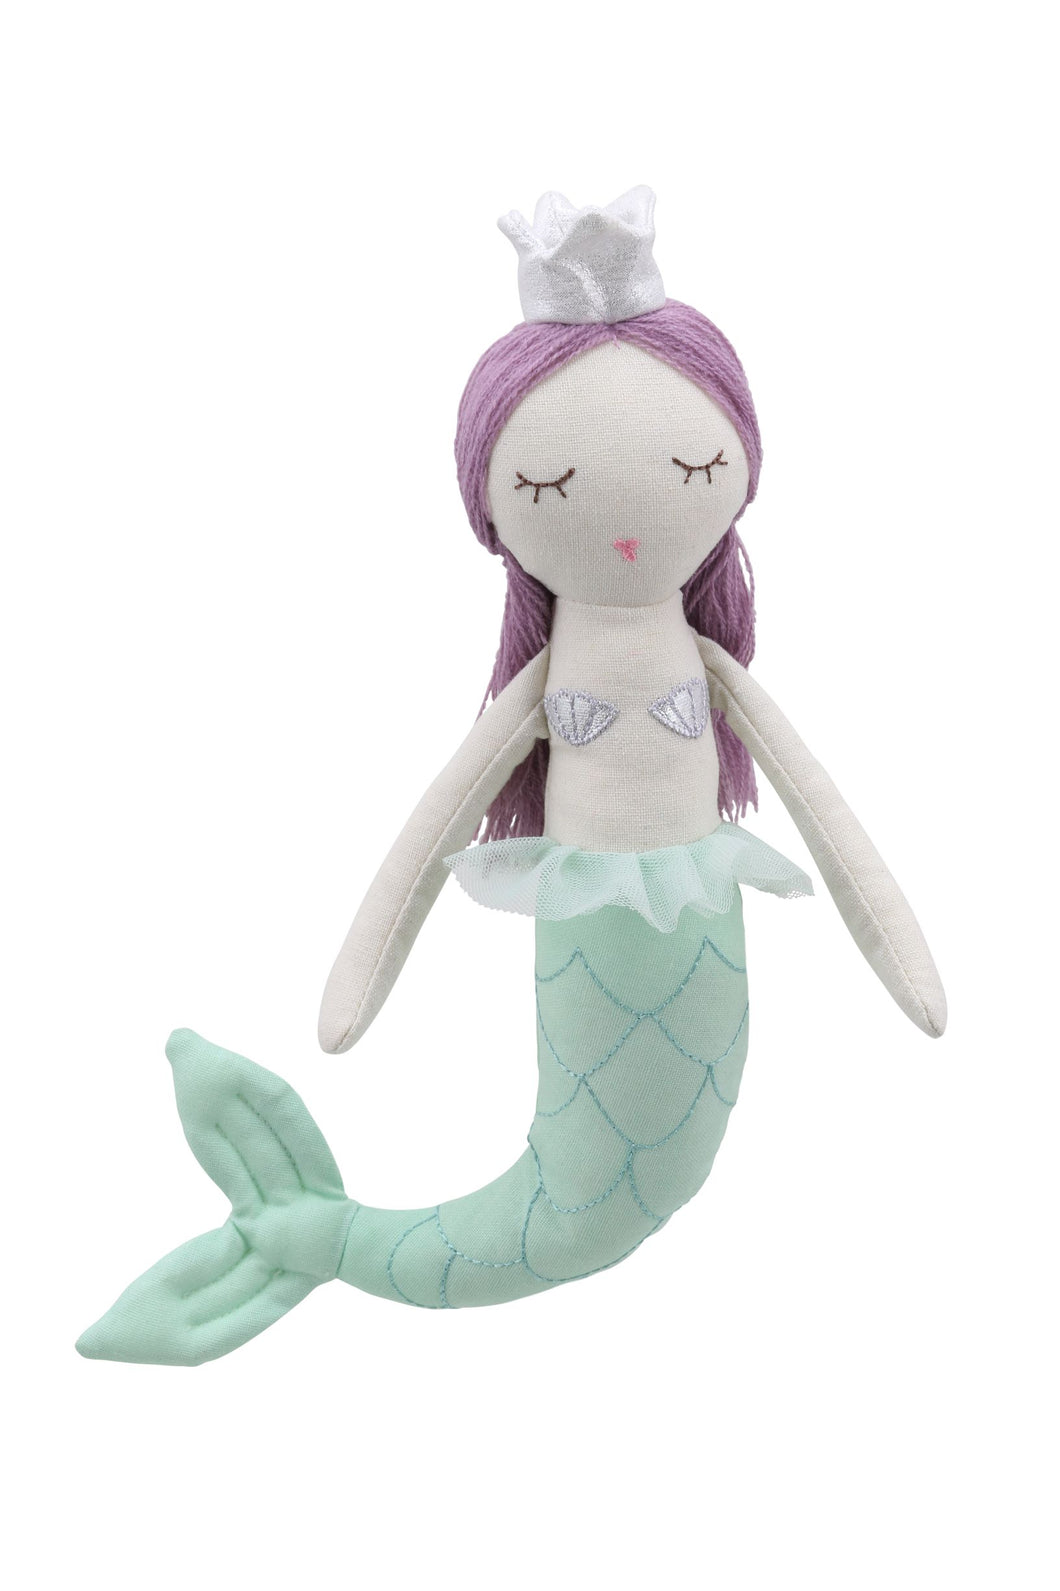 Mermaid with Purple Hair by Wilberry